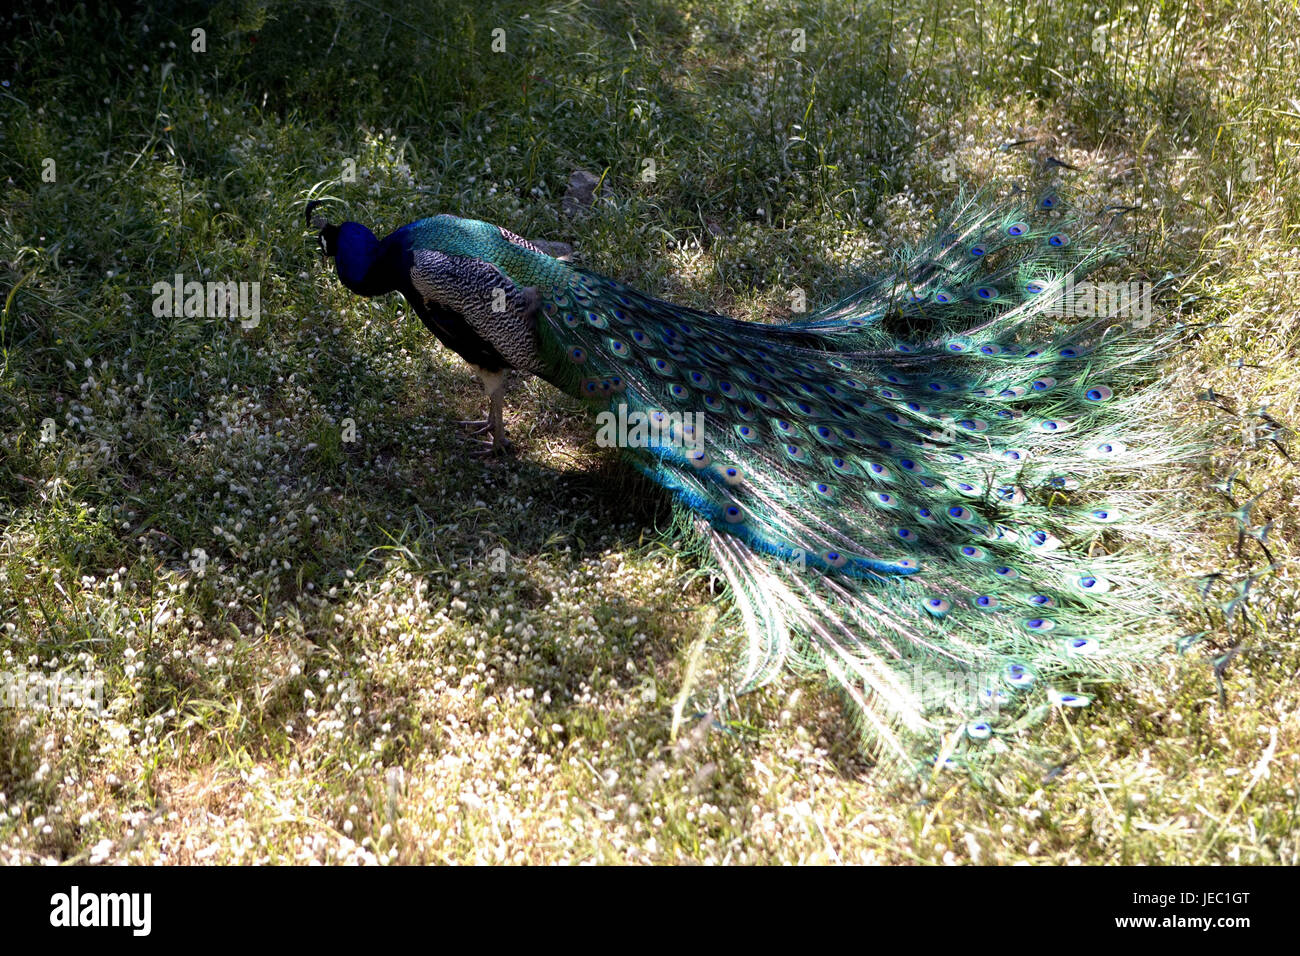 Greece, Rhodes, Filerimos, blue peacock, cloister park, cloister park, park, animal, peacock, plumage, plumage, Phasianidae, gallinaceous birds, at the side, Stock Photo